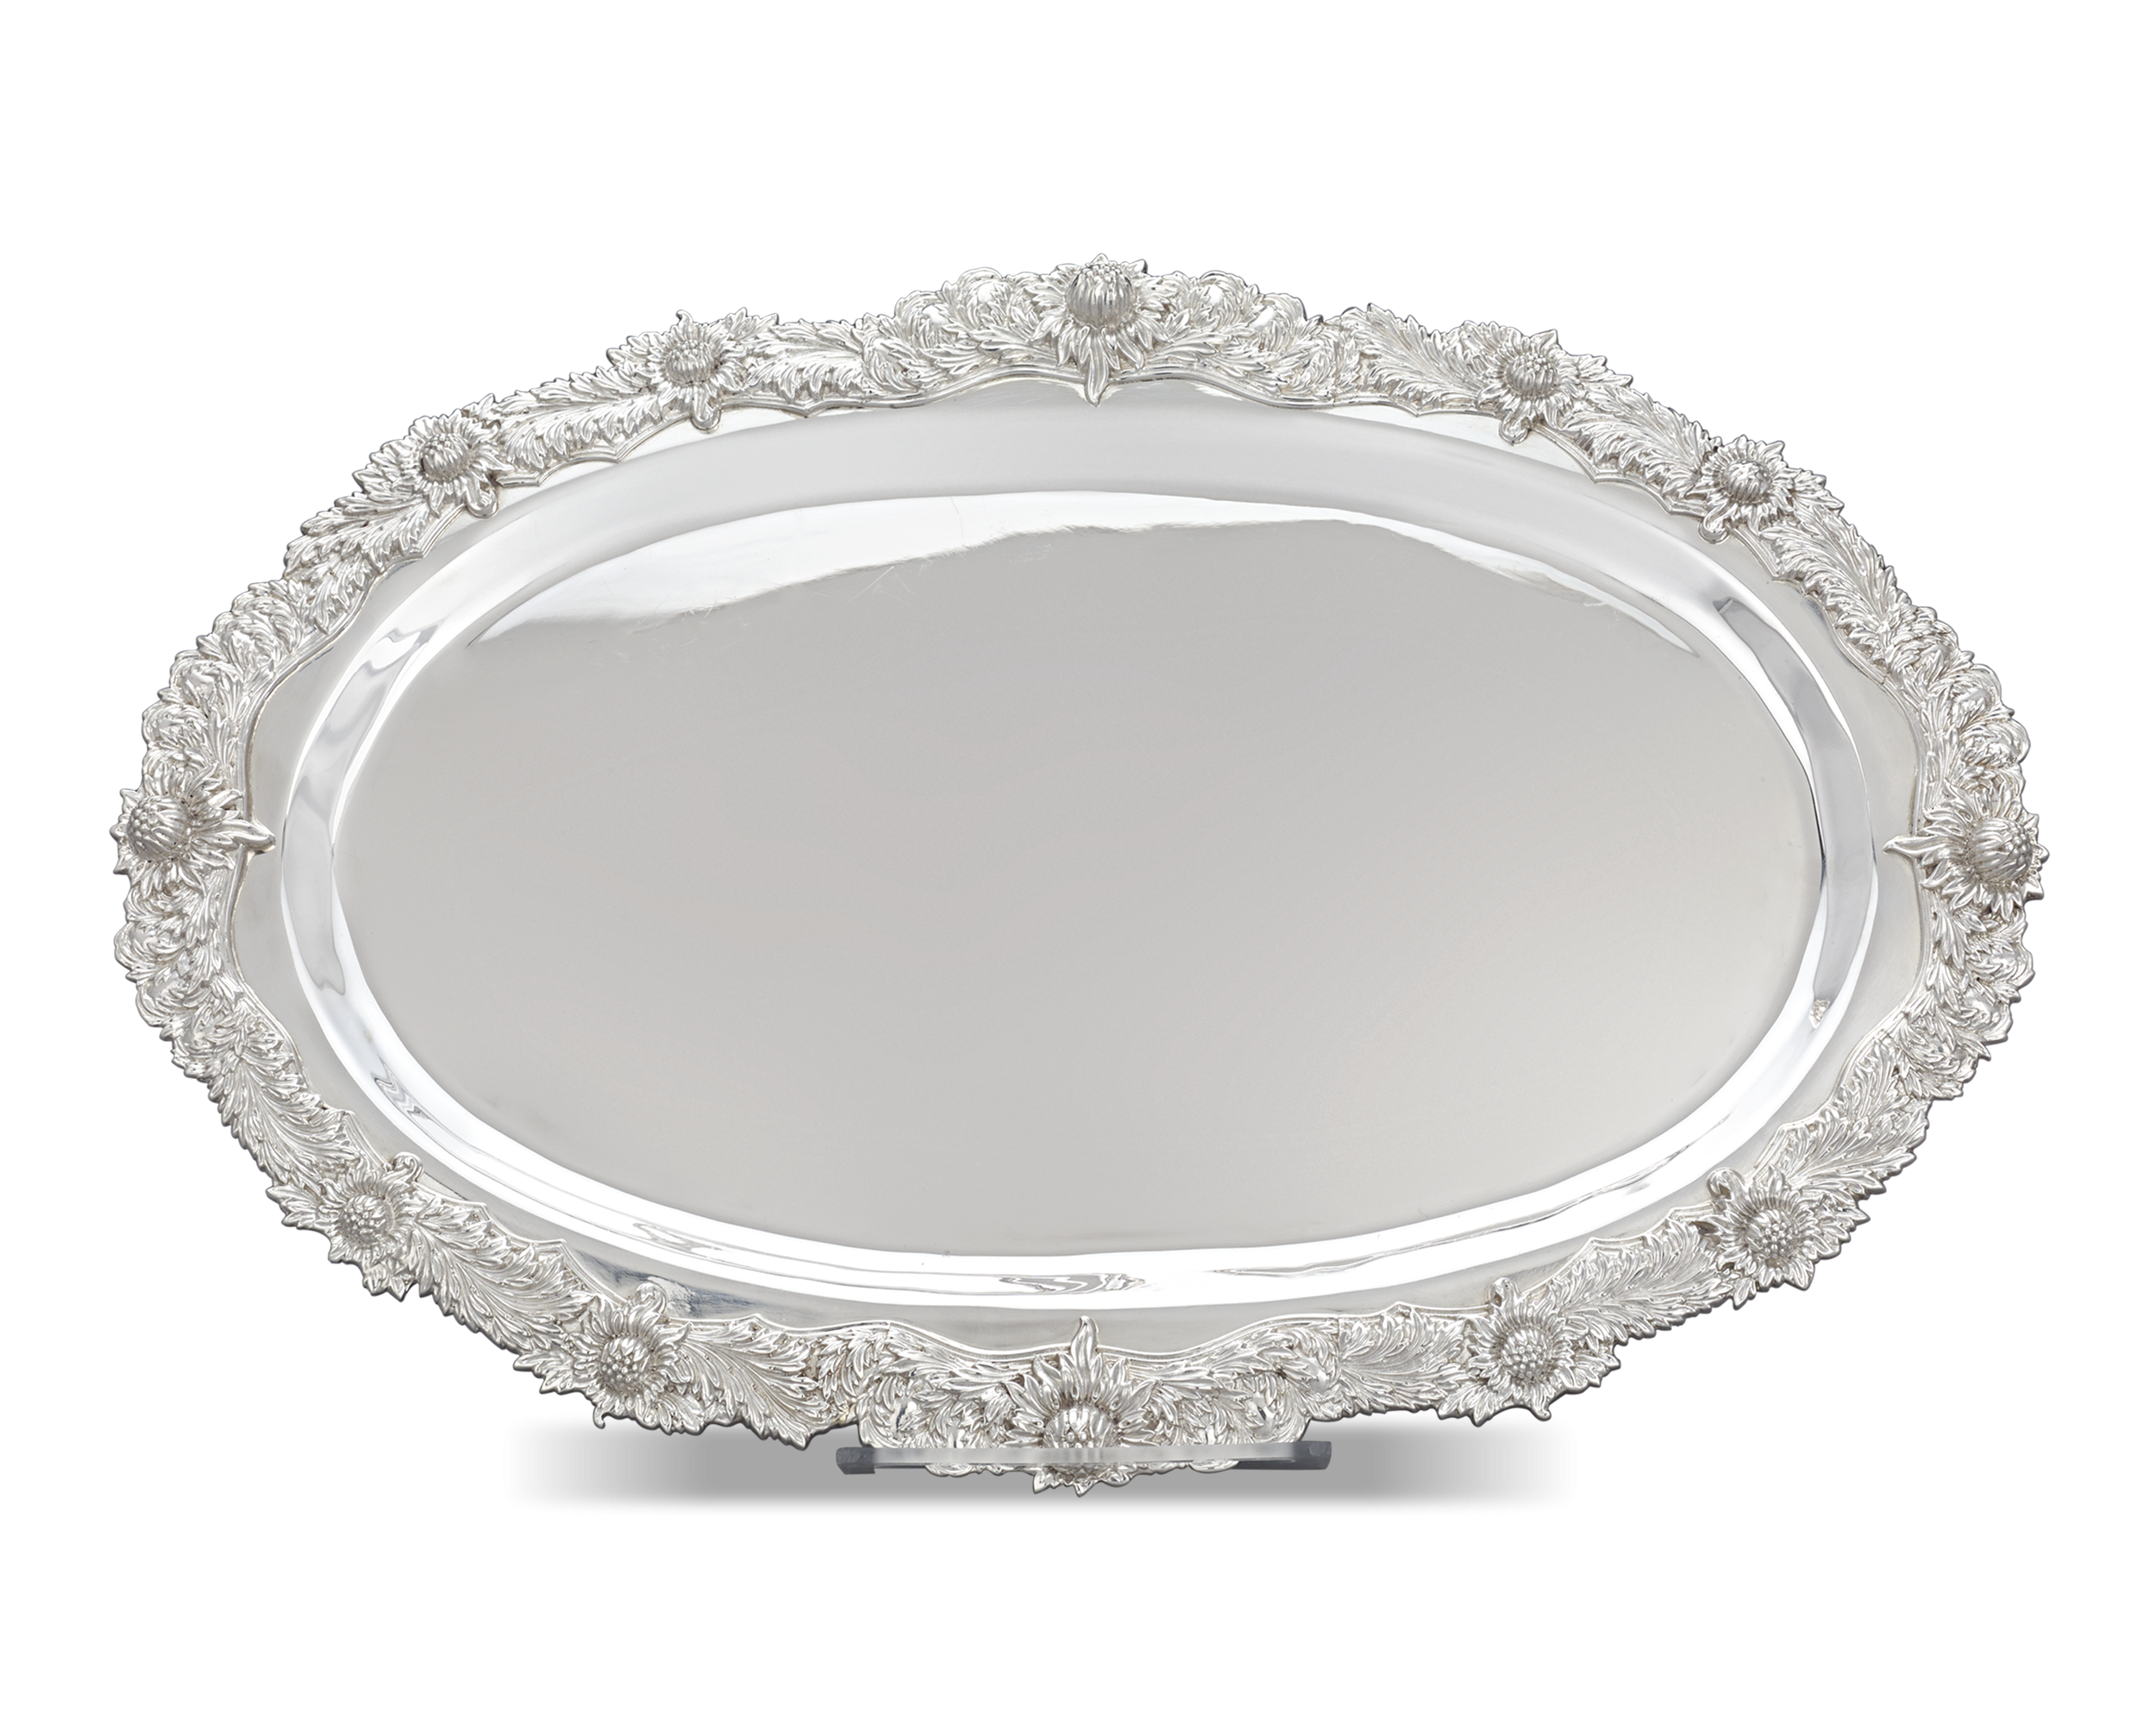 Chrysanthemum Sterling Silver Serving Tray by Tiffany & Co..